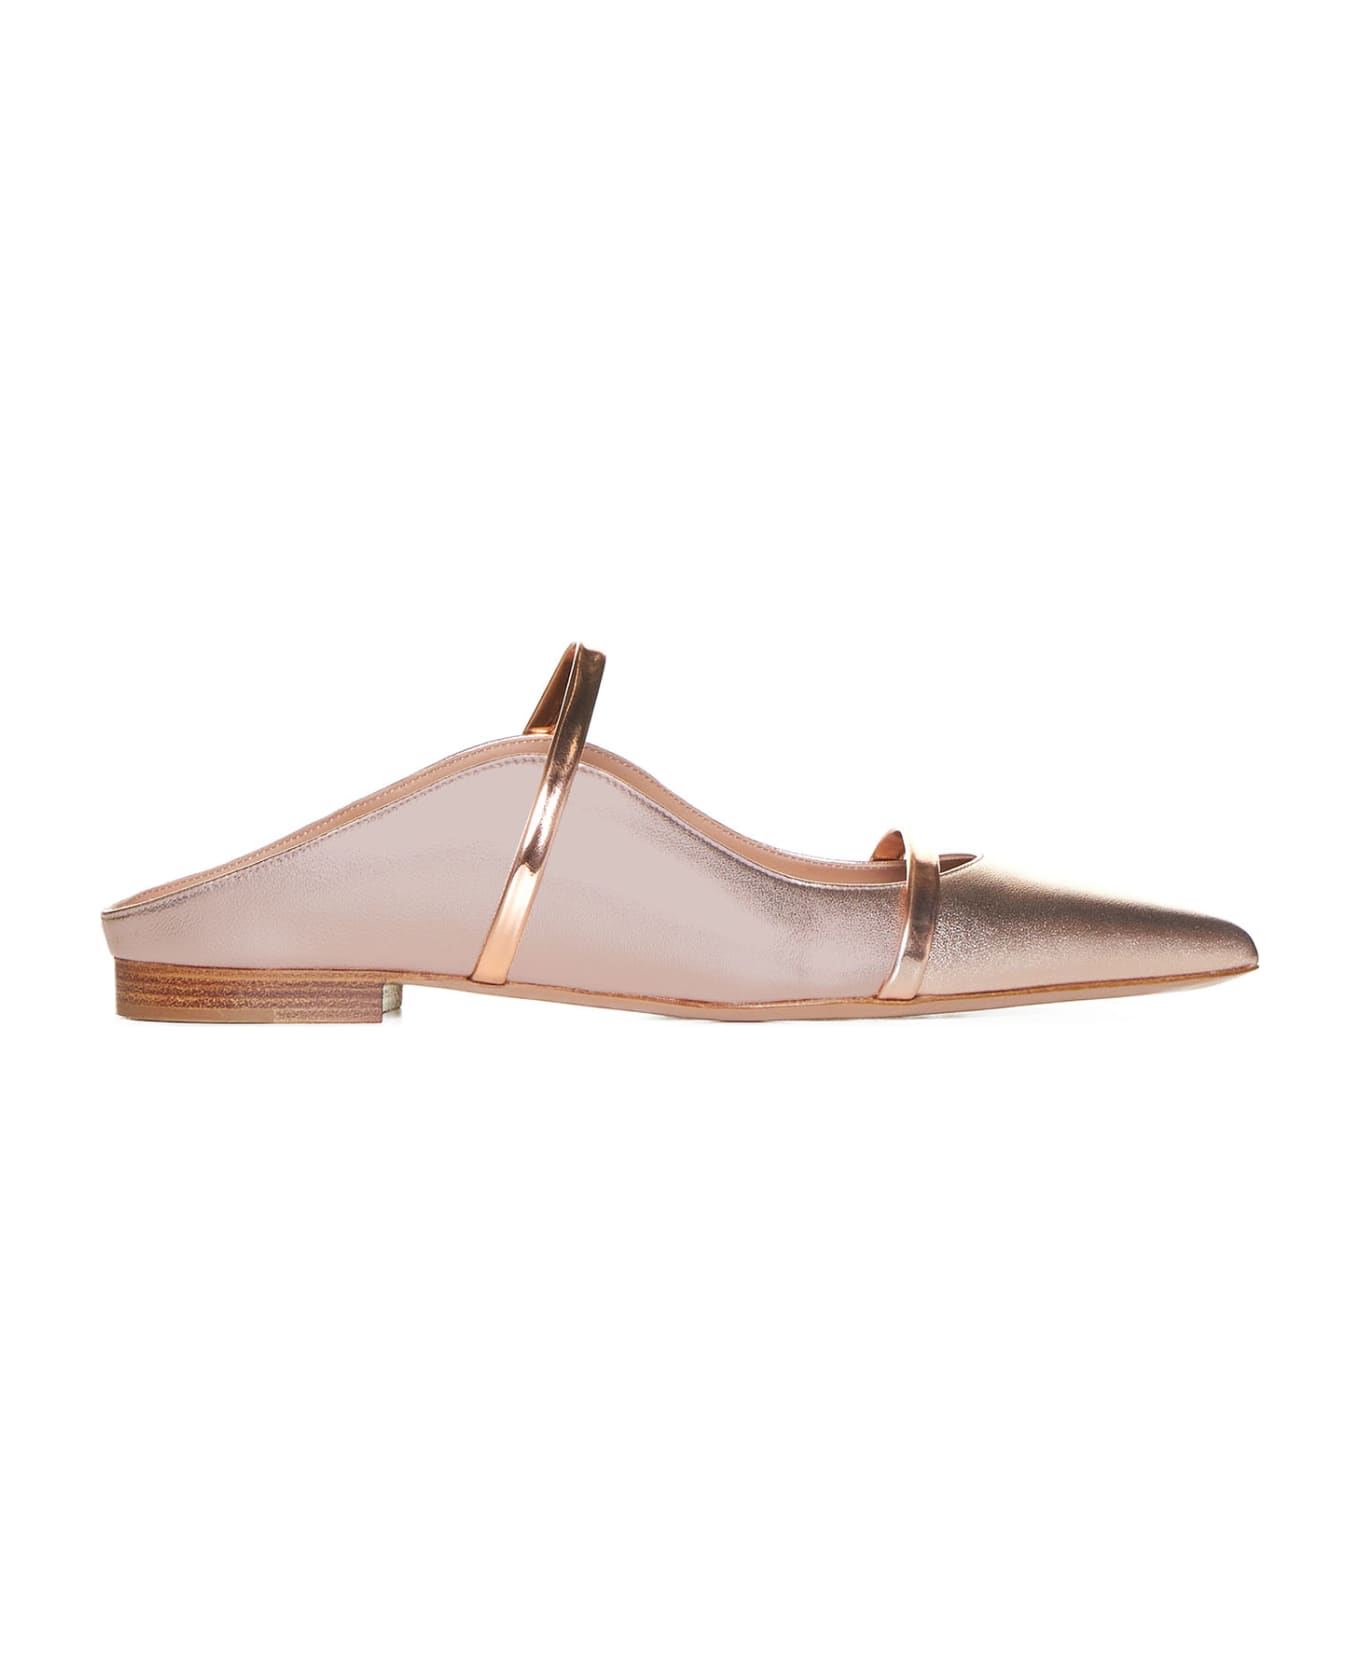 Malone Souliers Sandals - Rose gold フラットシューズ